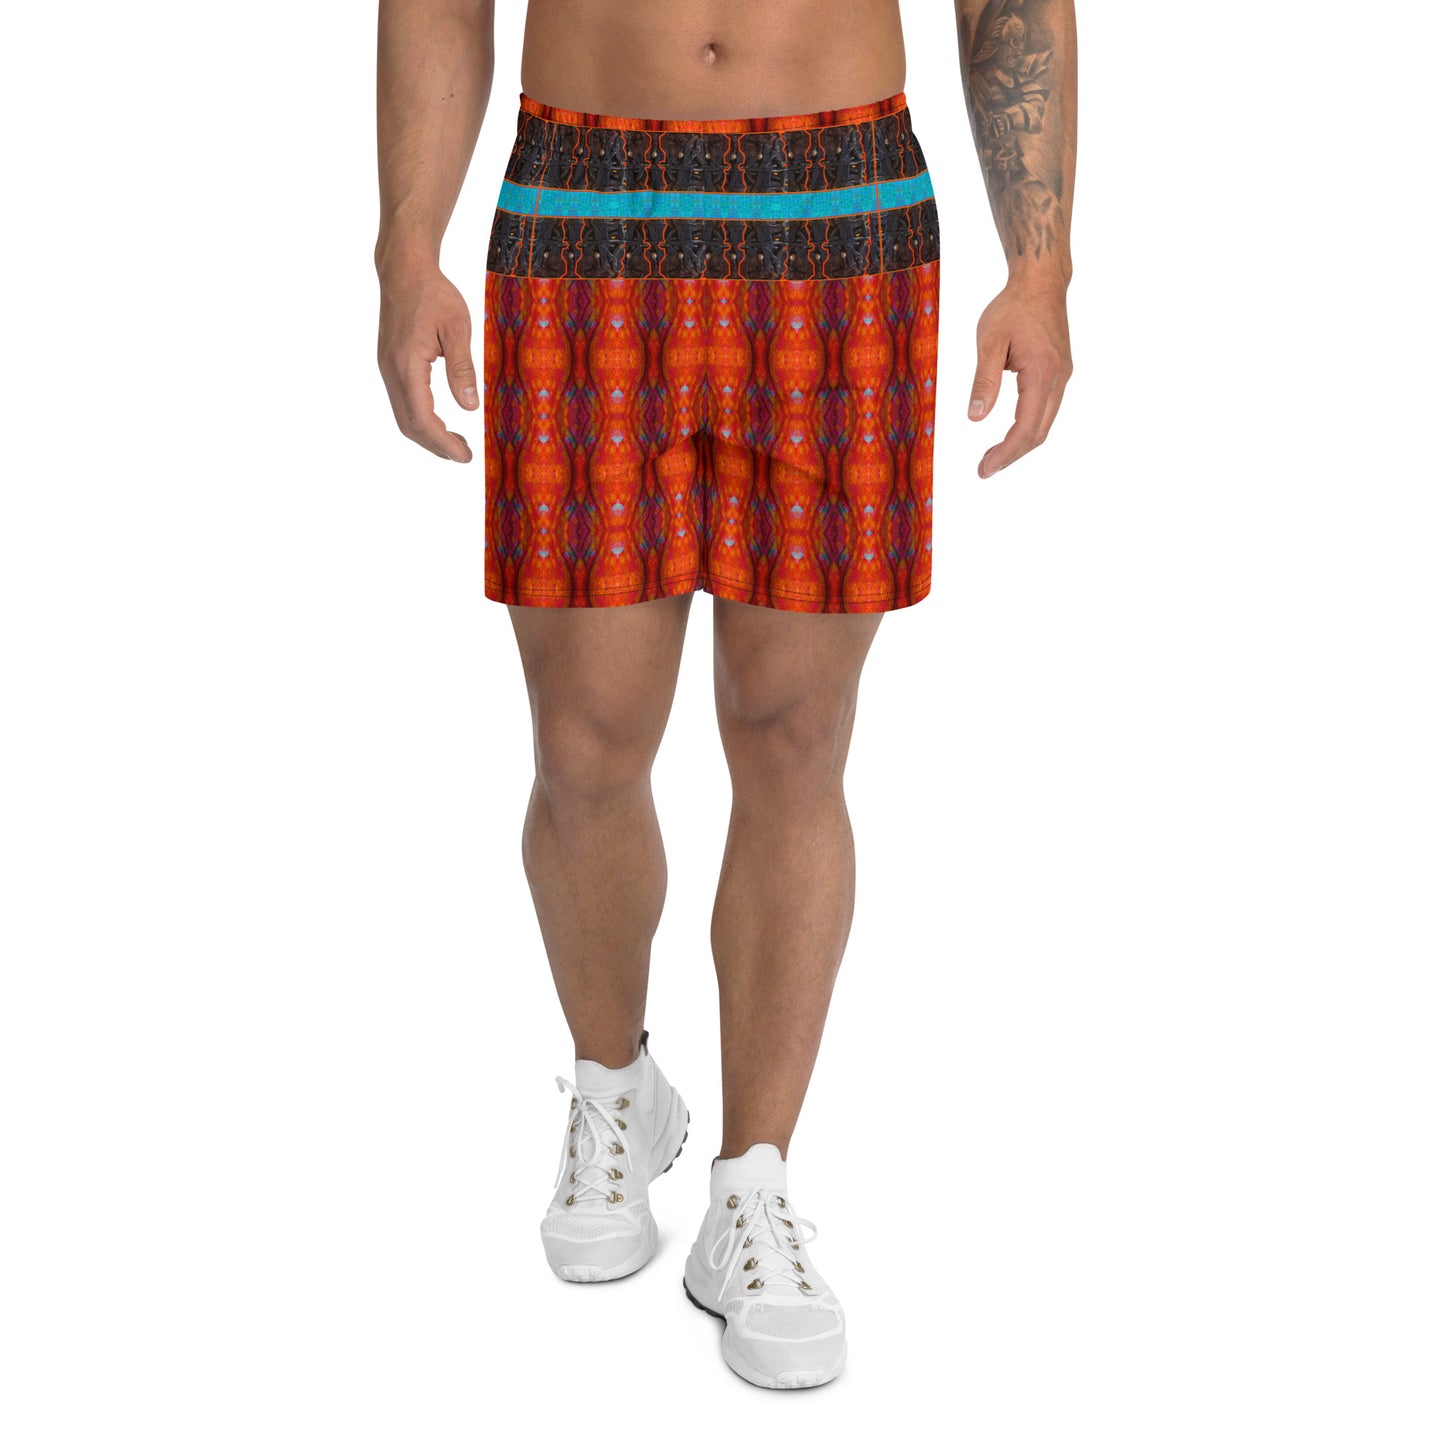 Athletic Long Shorts (His/They)(Tree Link Stripe) RJSTH@Fabric#12 RJSTHS2021 RJS